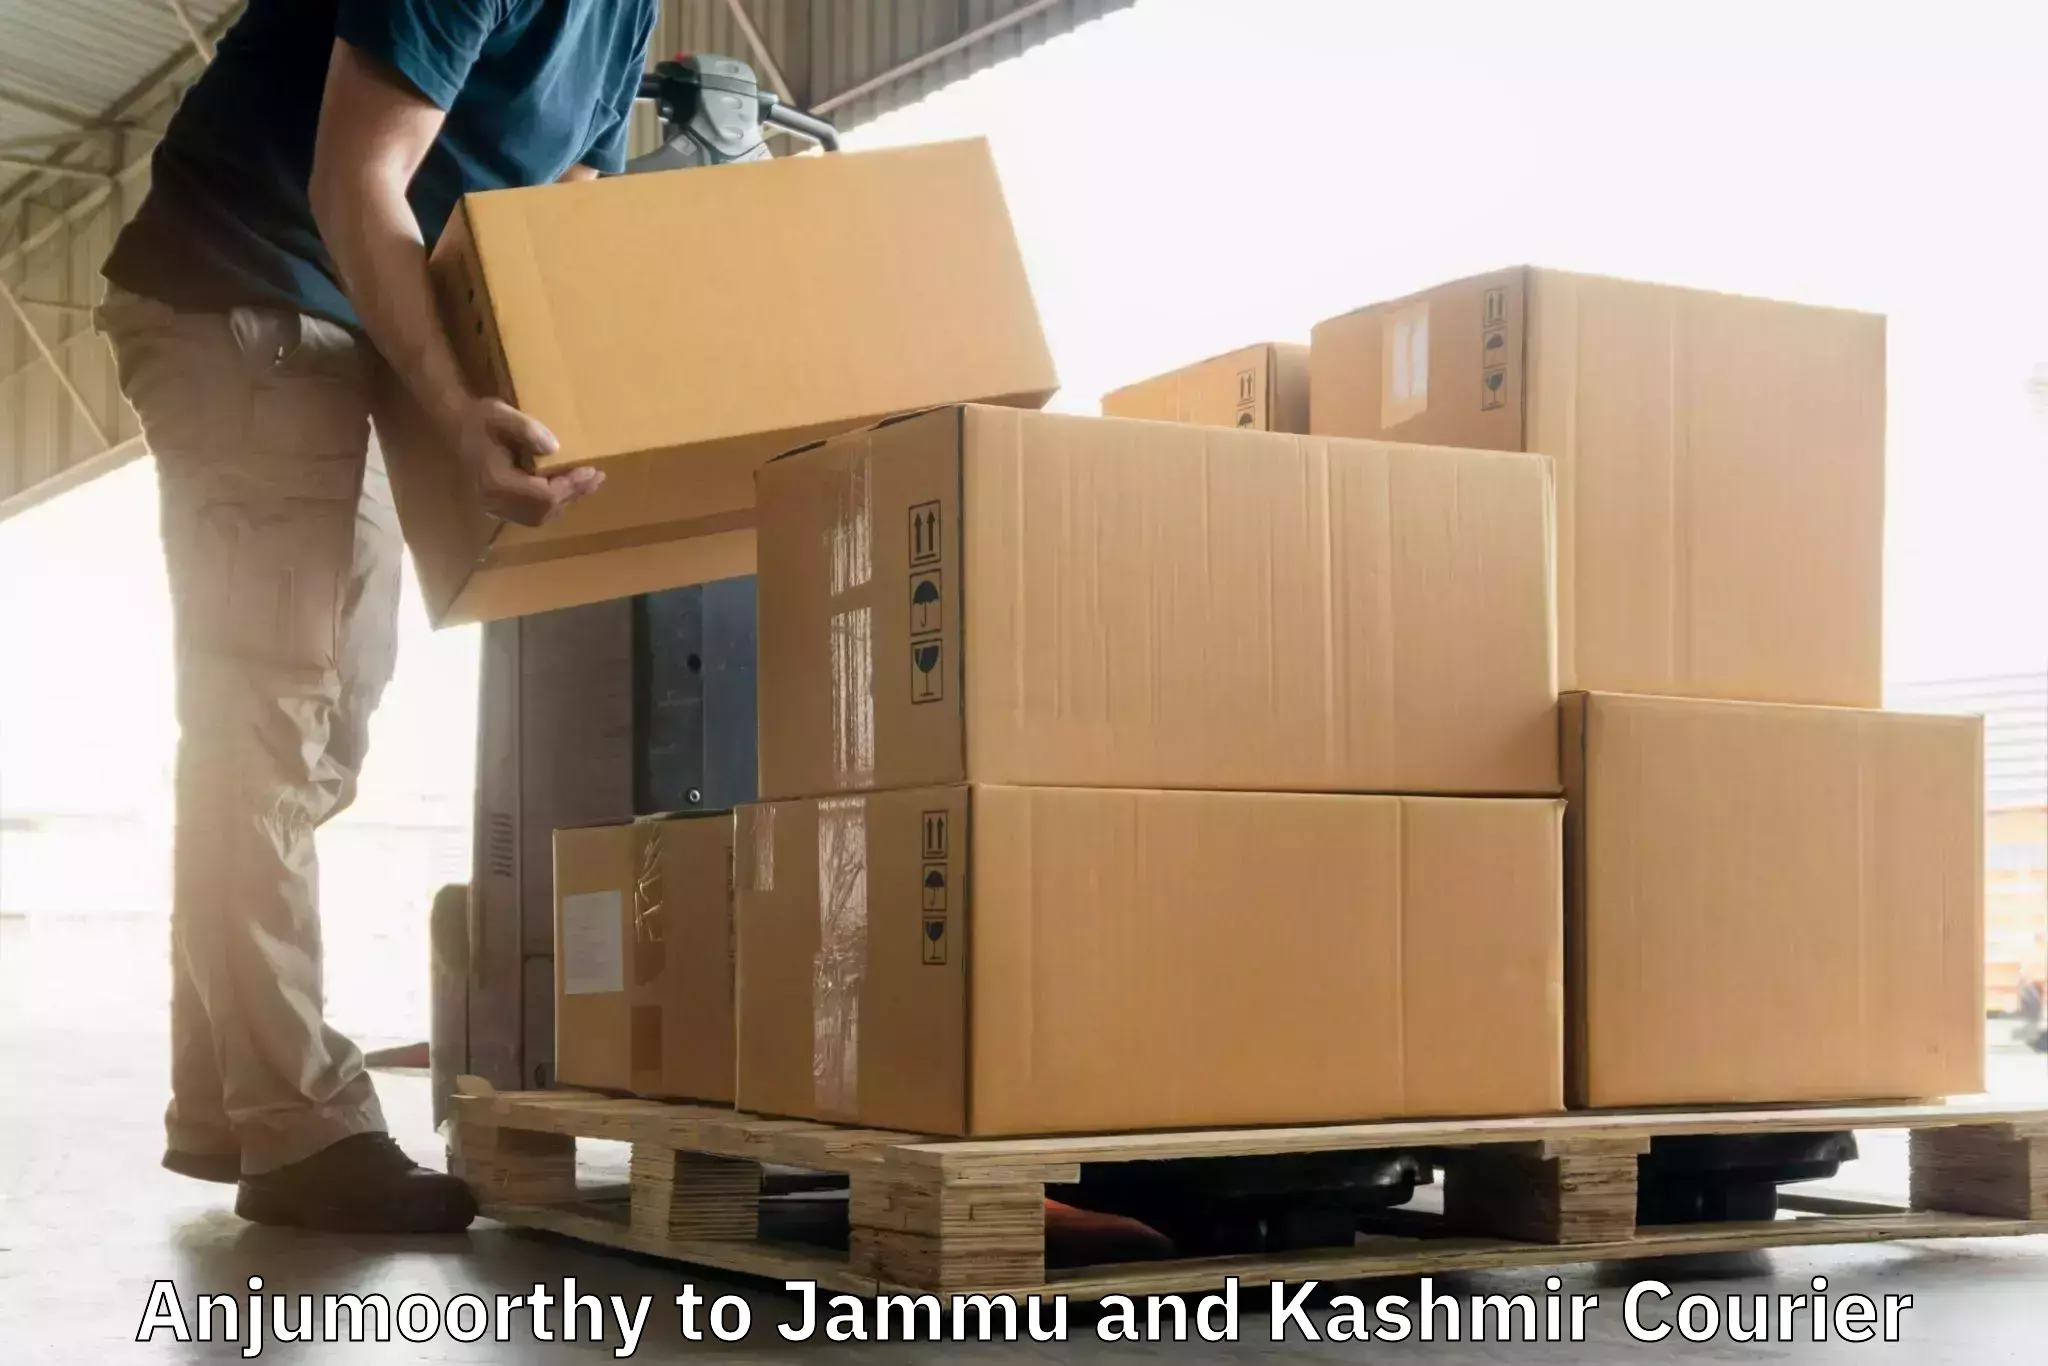 Multi-national courier services Anjumoorthy to University of Jammu